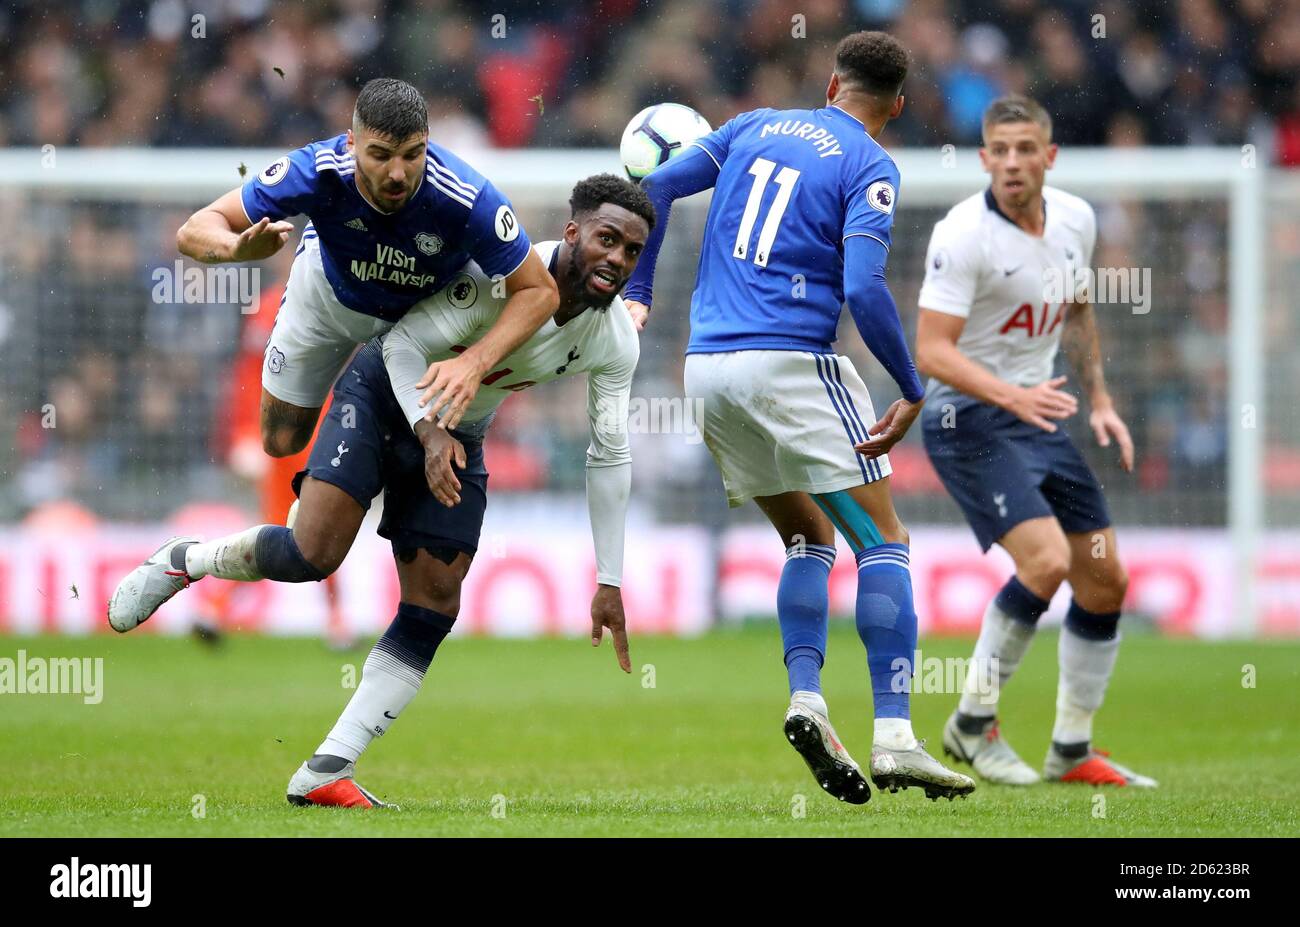 Tottenham Hotspur's Danny Rose (second left) battles for the ball with Cardiff City's Callum Paterson (left) and Josh Murphy Stock Photo